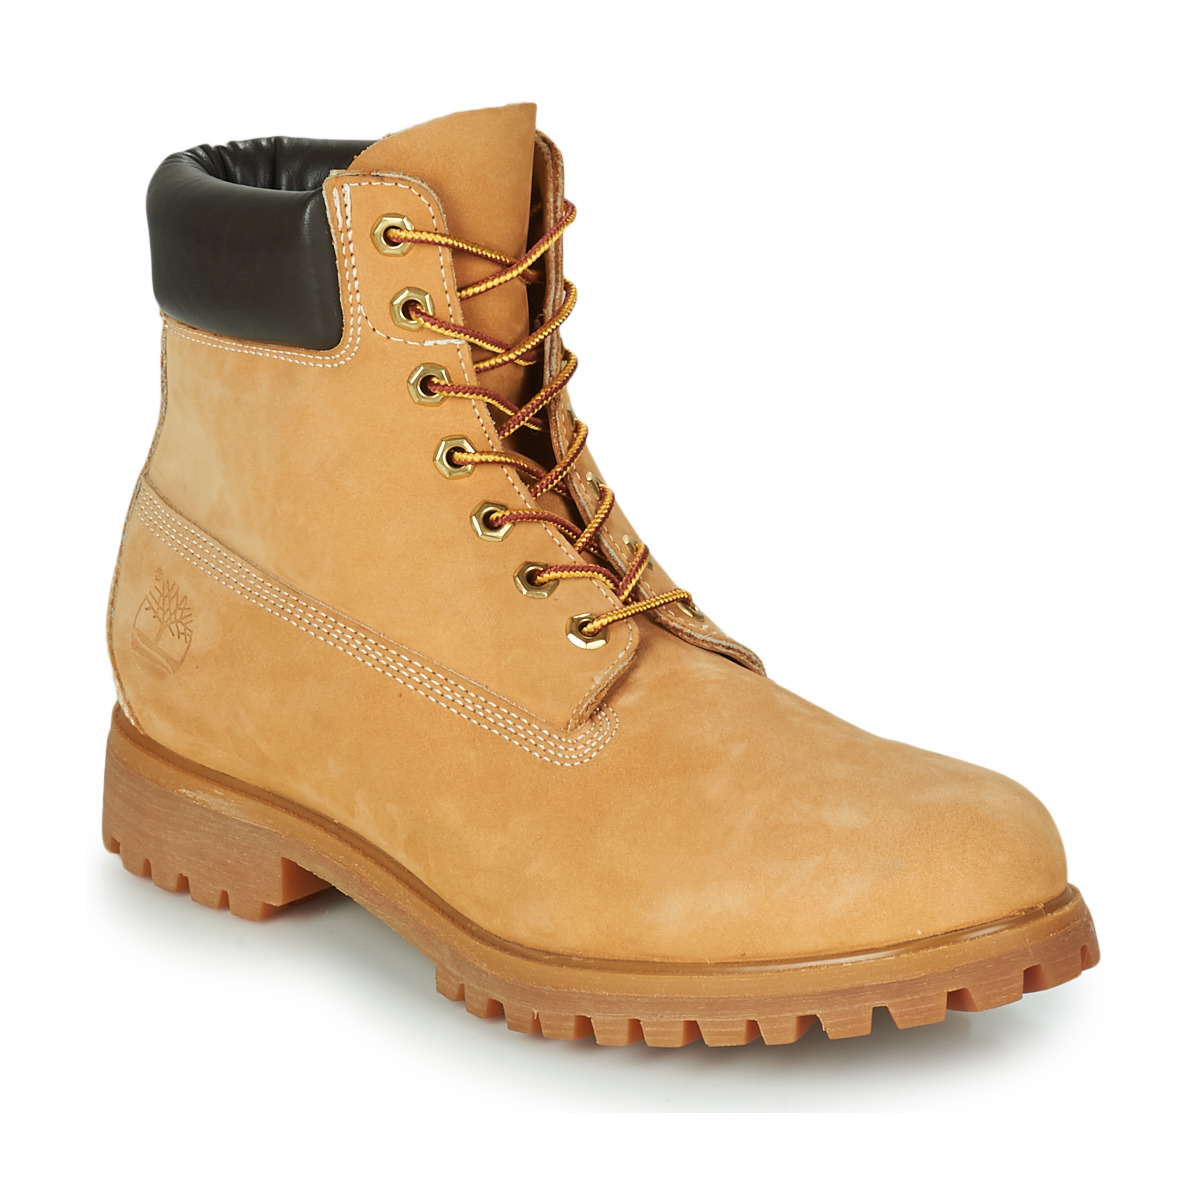 Timberland BOOT 6'' Wheat delivery | Spartoo NET ! - Shoes boots Men USD/$235.50